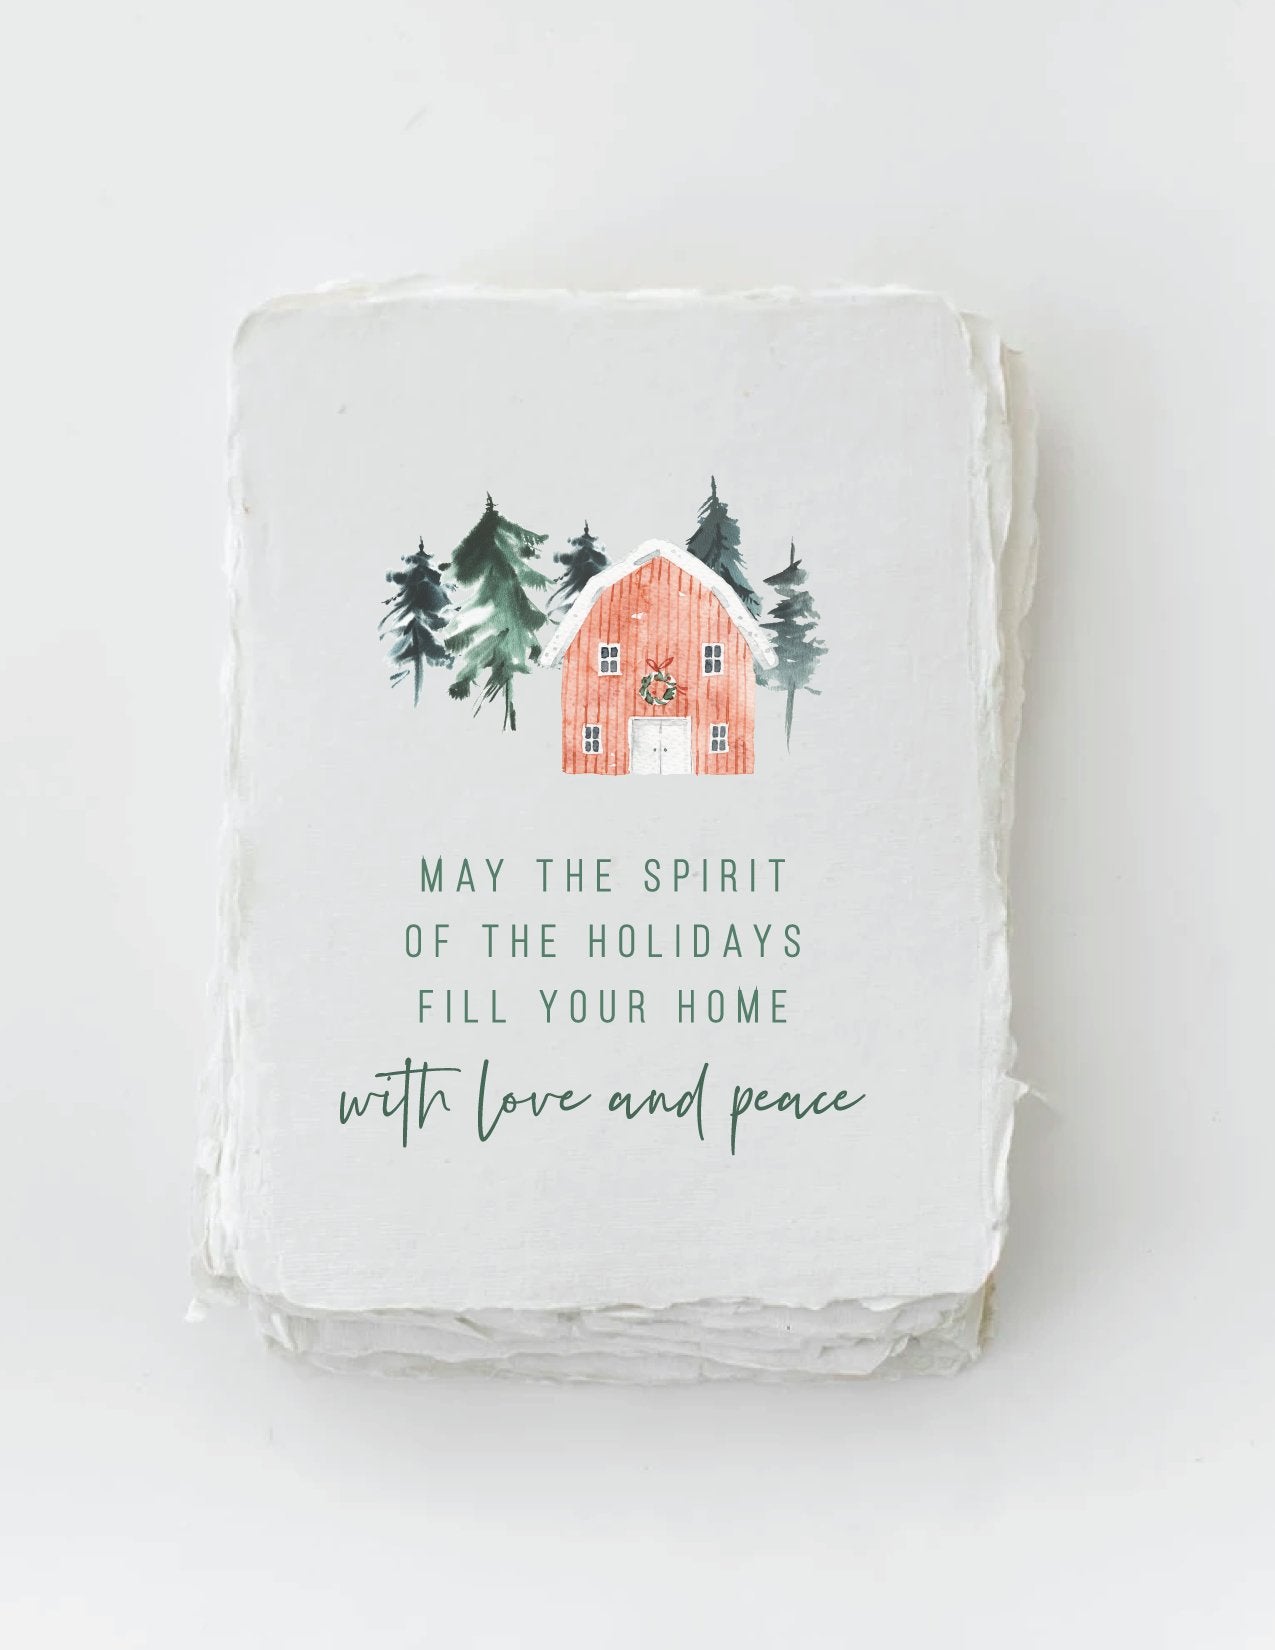 "With Love and Peace" | Christmas Greeting Card - Wellaine